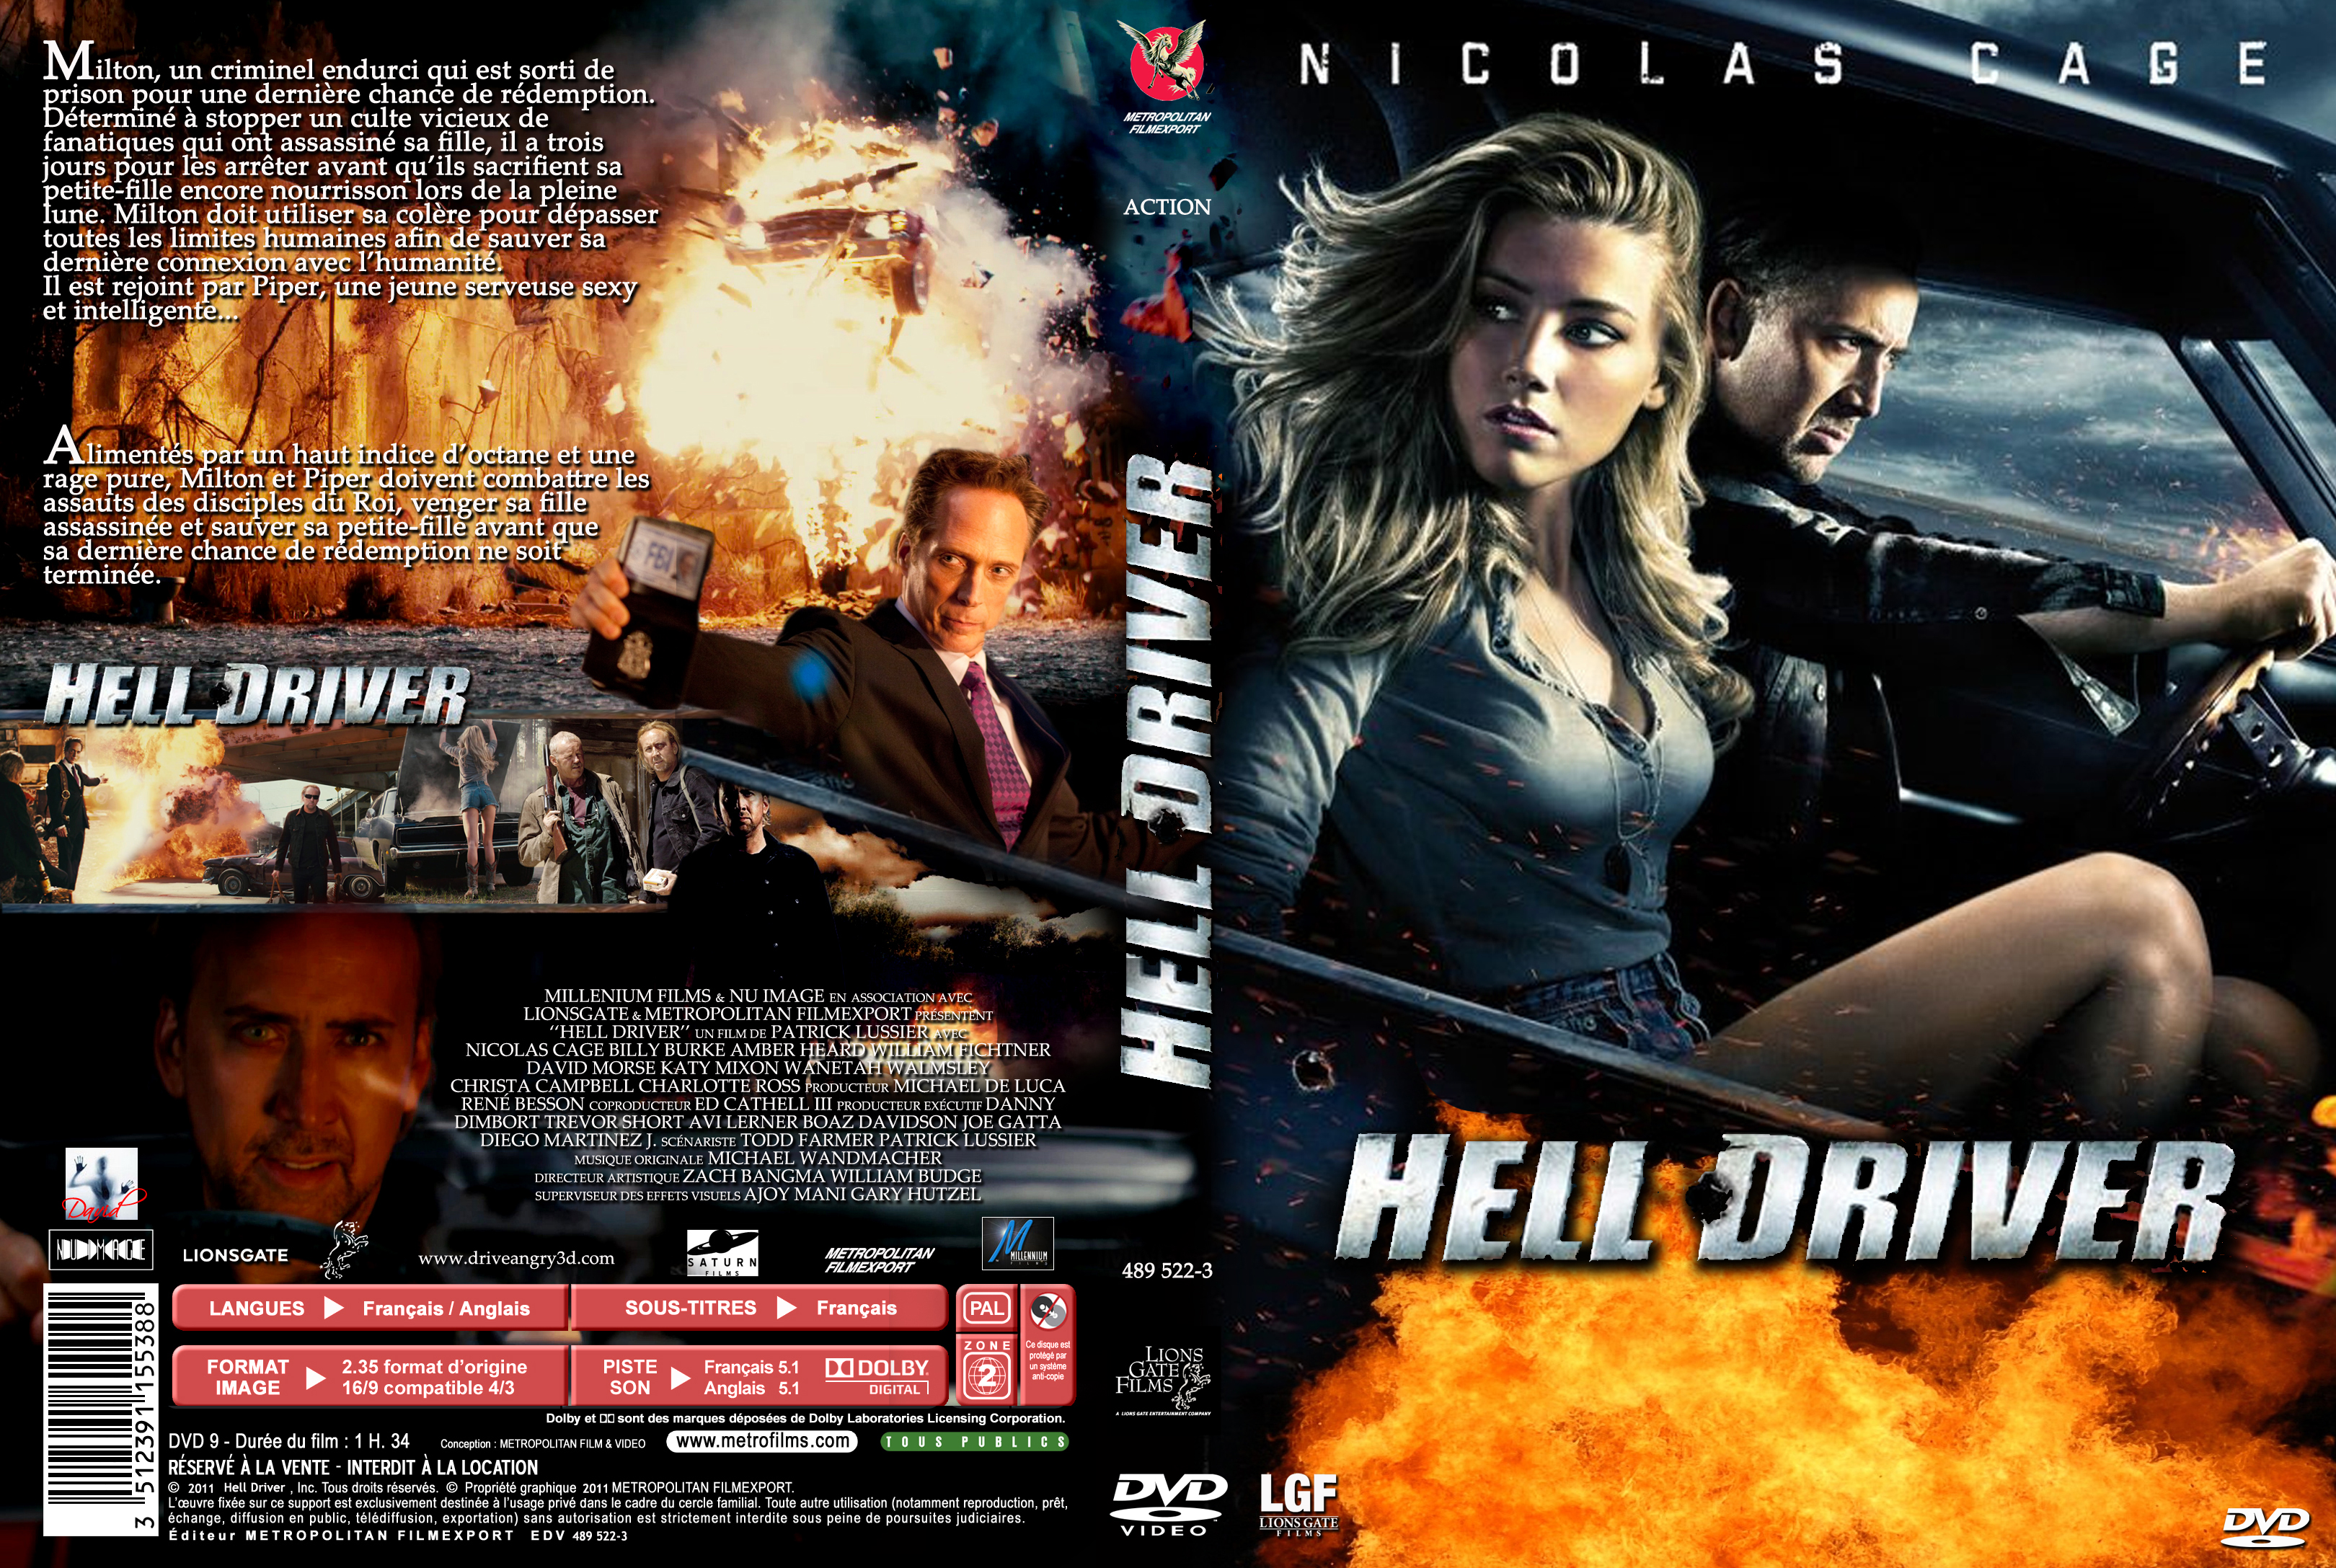 Jaquette DVD Hell driver custom